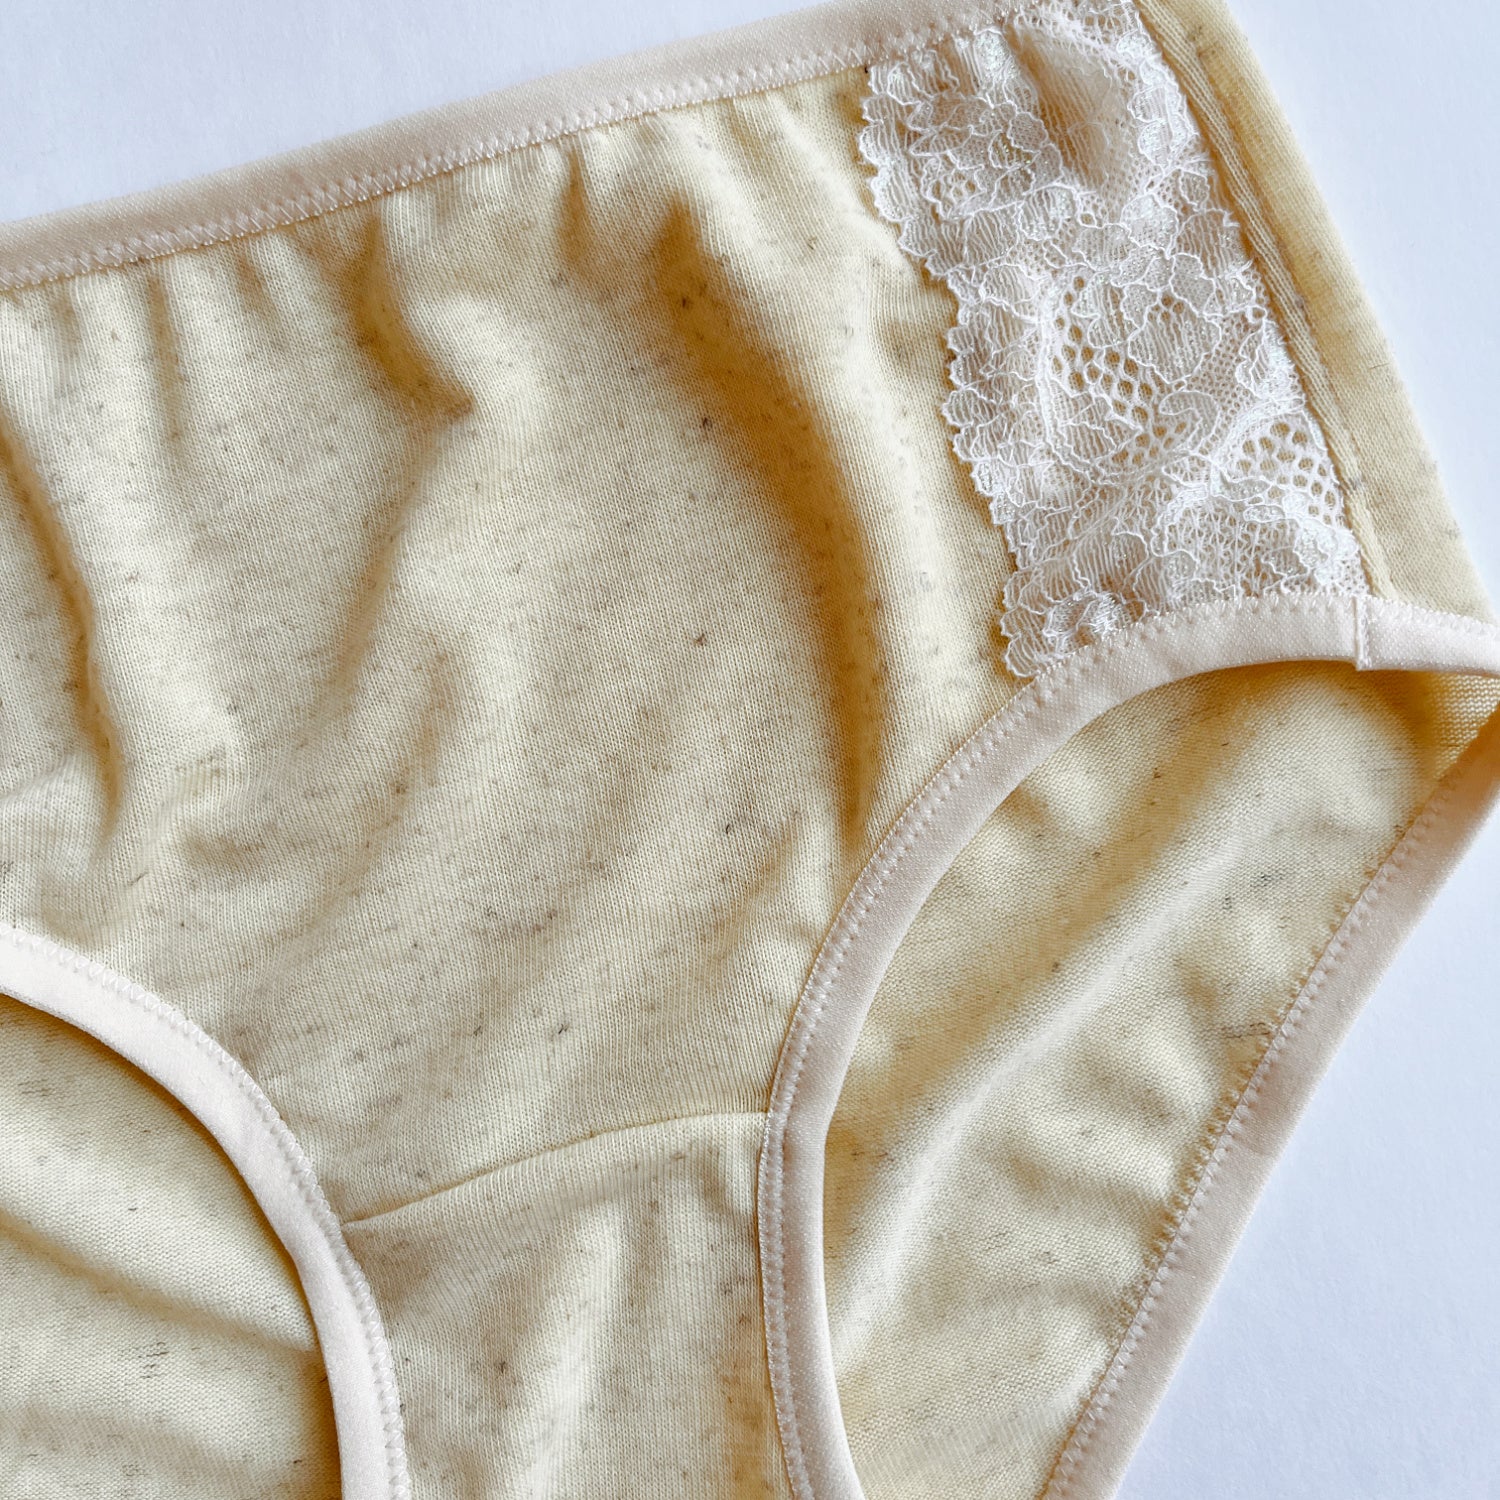 Organic Linen Underwear with Sexi soft Lace, Flax Lingerie, Pure